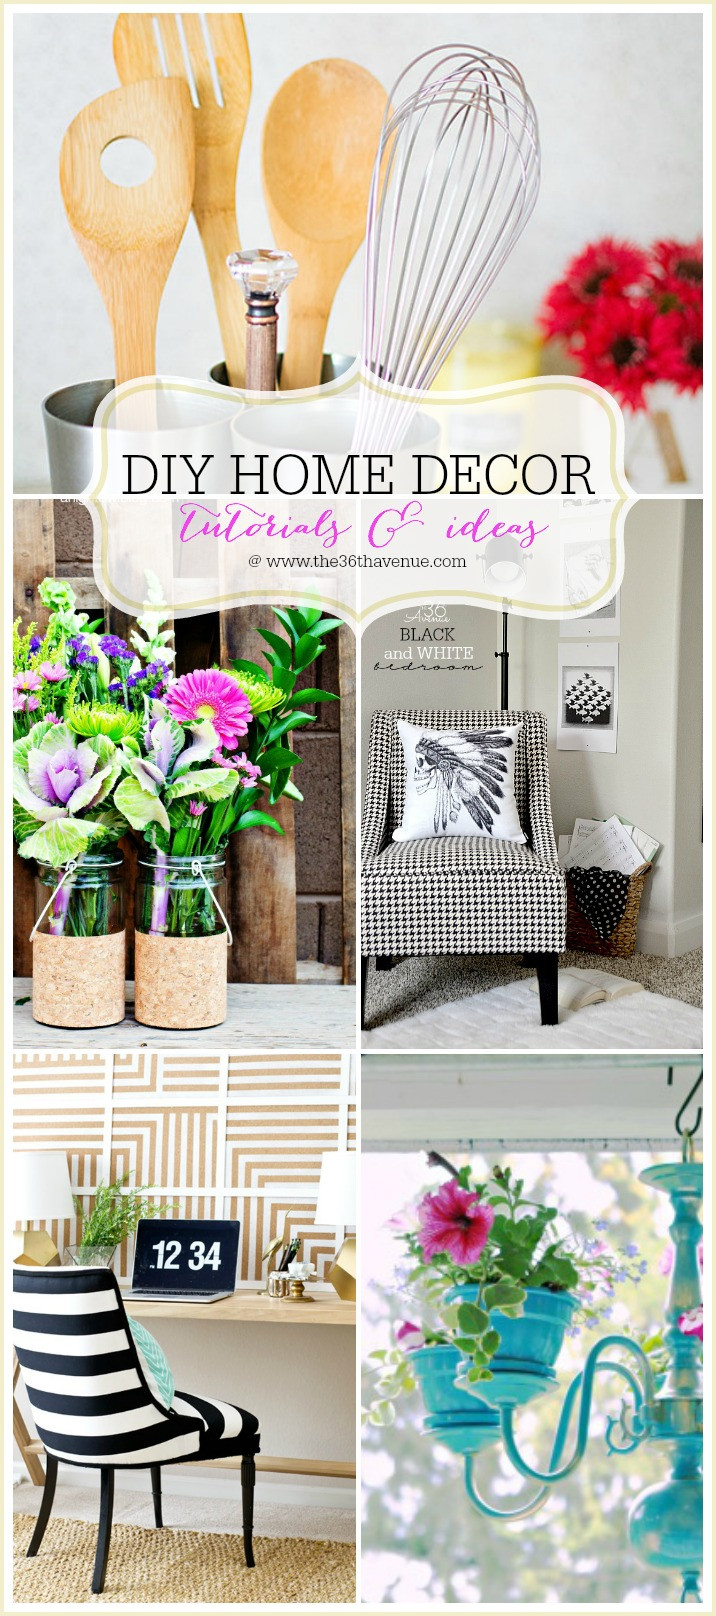 Simple DIY Home Decor
 The 36th AVENUE Home Decor DIY Projects